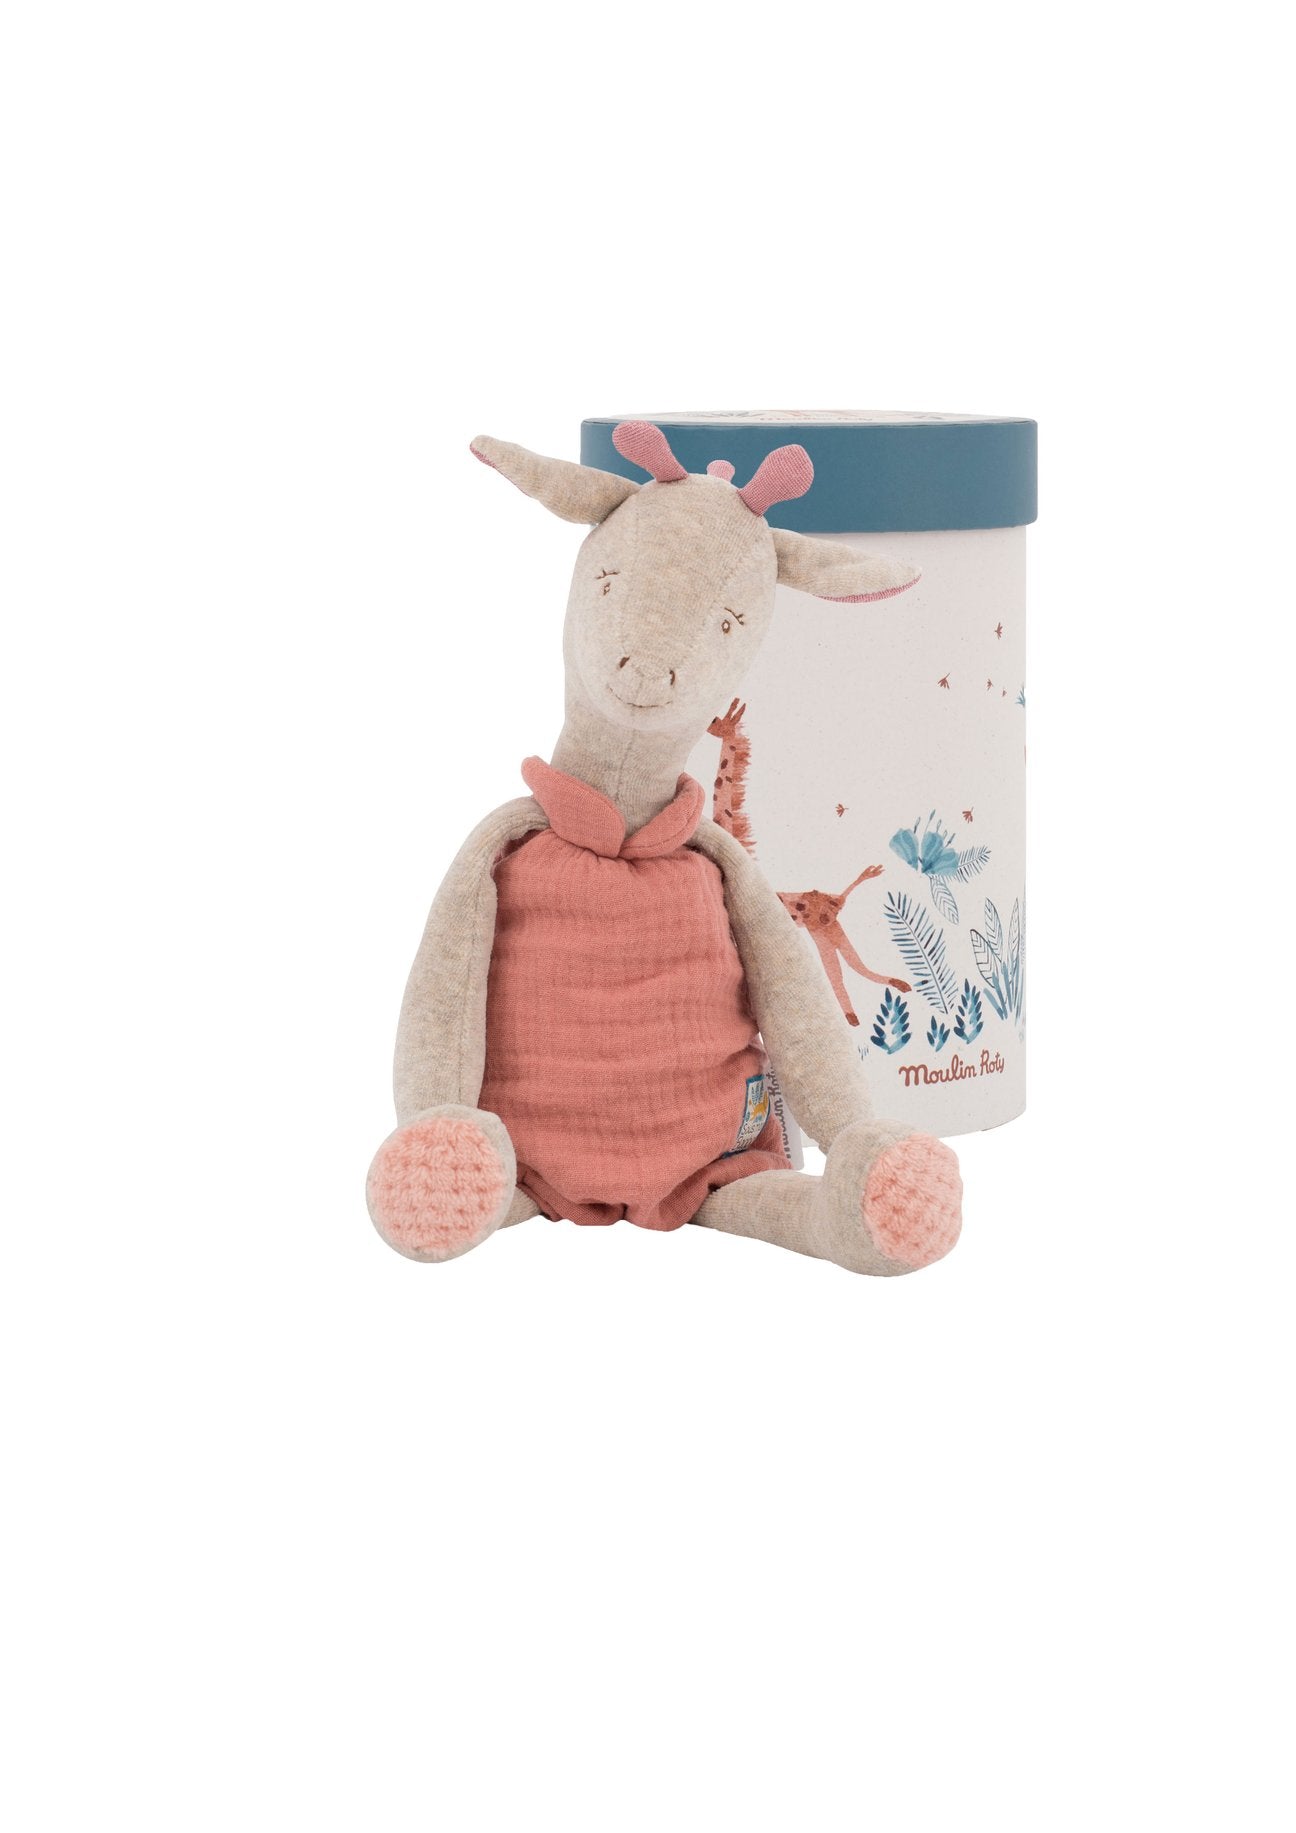 Sous Mon Baobab Soft Toy - BIBISCUS the Giraffe - The Little Je'EL.Co